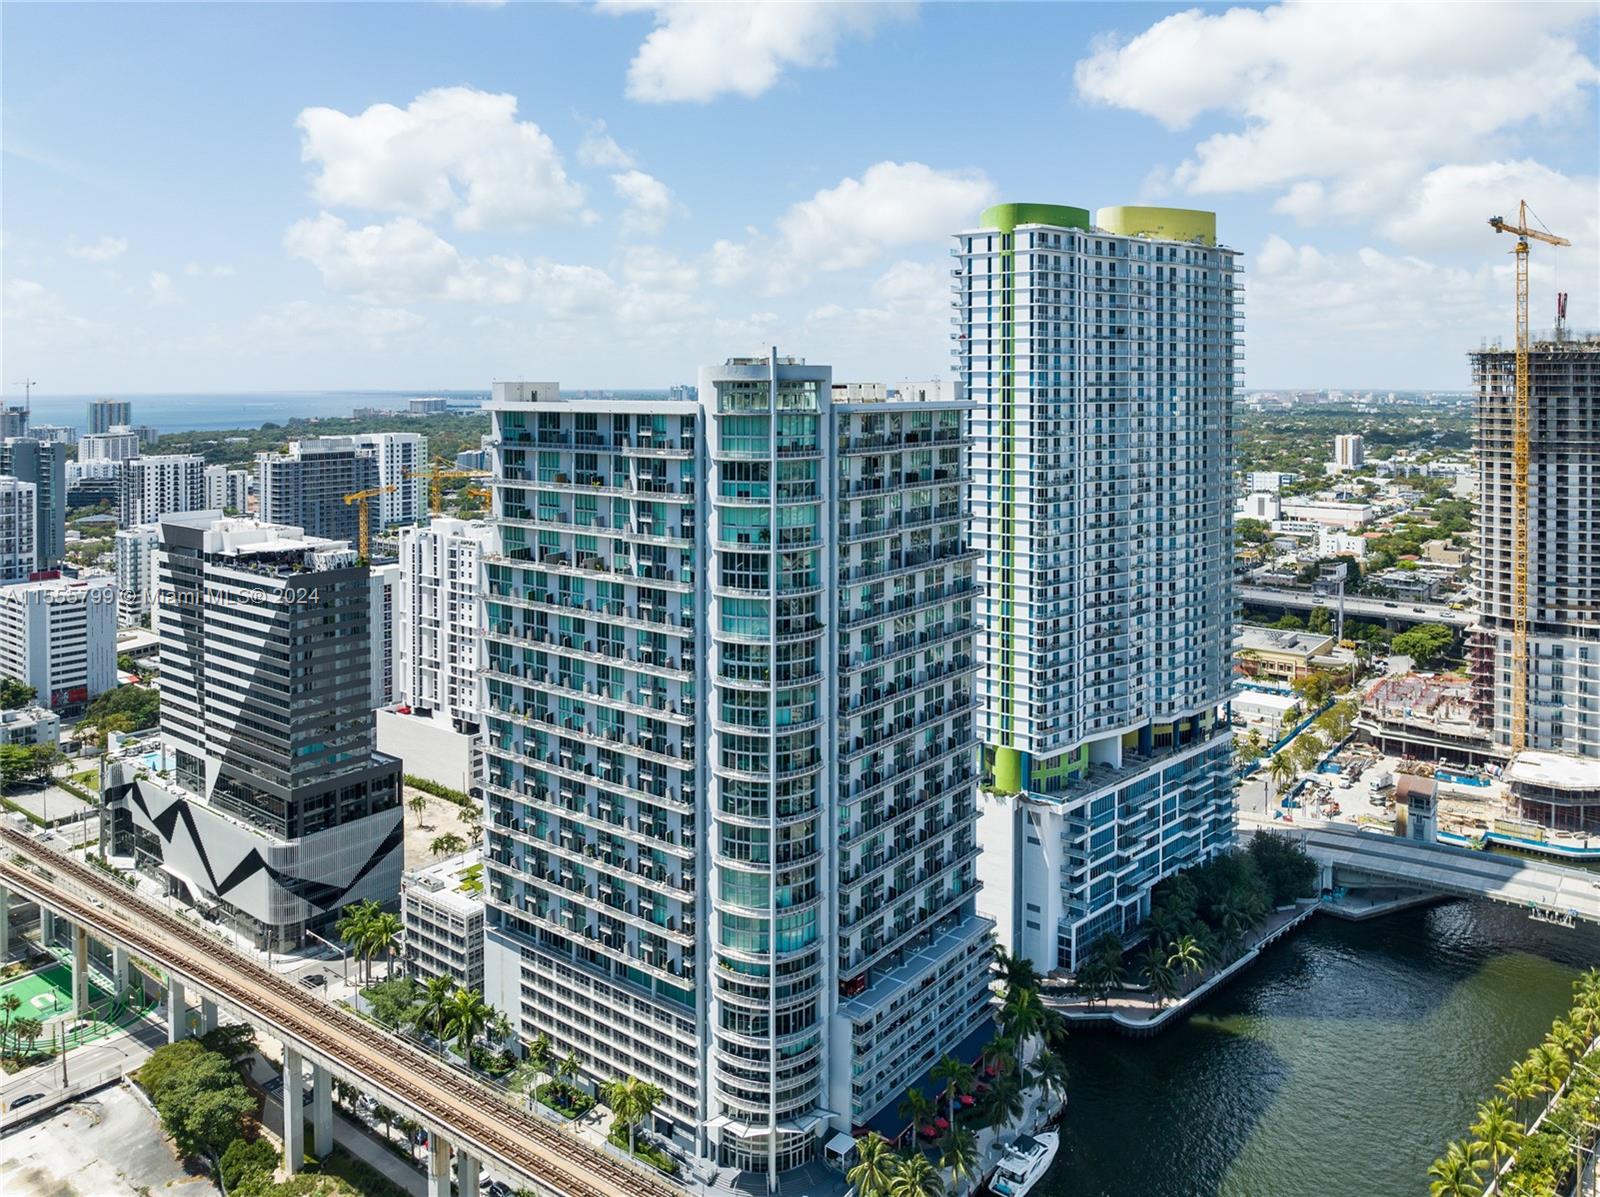 Amazing 2 story, 3 bedroom, 2 bathroom unit in Neo Vertika. Open and bright featuring tile flooring, wood flooring, and updated bathrooms with european style vanities and glass for showers. Two parking spaces: One assigned parking space and one parking space through valet. Walking distance to Brickell City Centre, Mary Brickell Village, and many other areas of interest. Multiple restaurants located at bottom of building. The building also features Modern pool with sun pads and jacuzzi, gym, sauna, steam room, game room, racquetball court, boxing ring, party room, exterior party area, business center, bike storage, boat dock, and more. The building also has a good sense of security utilizing fobs designed for main entrance, elevator to specific floors, and access to assigned parking.